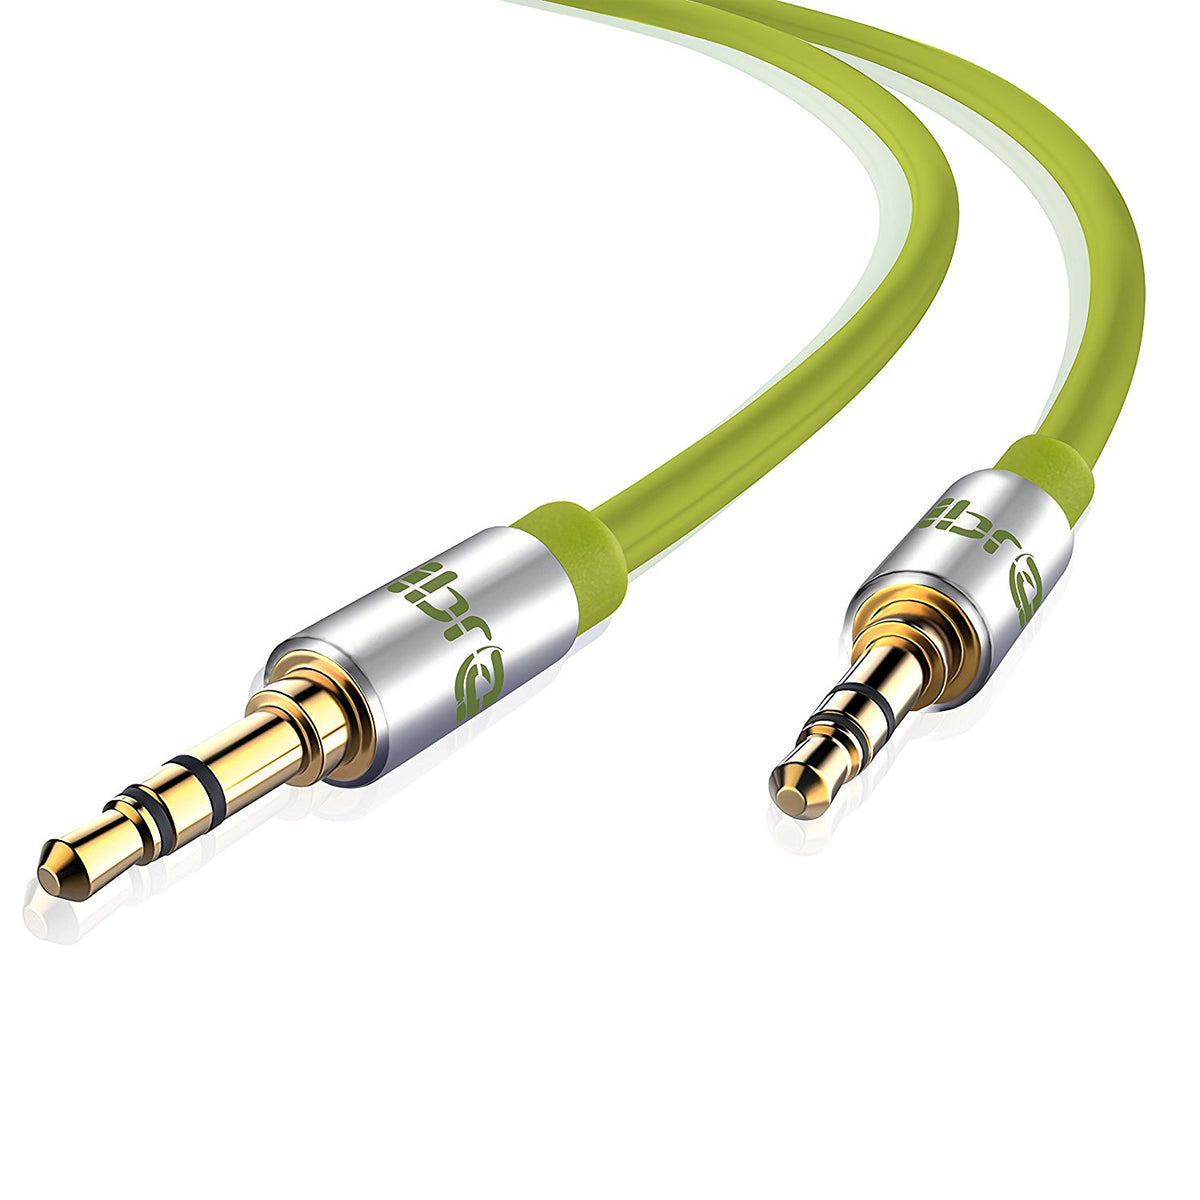 Aux Cable 10M 3.5mm Stereo Pro Auxiliary Audio Cable - for Beats Headphones Apple iPod iPhone iPad Samsung LG Smartphone MP3 Player Home / Car etc - IBRA Green